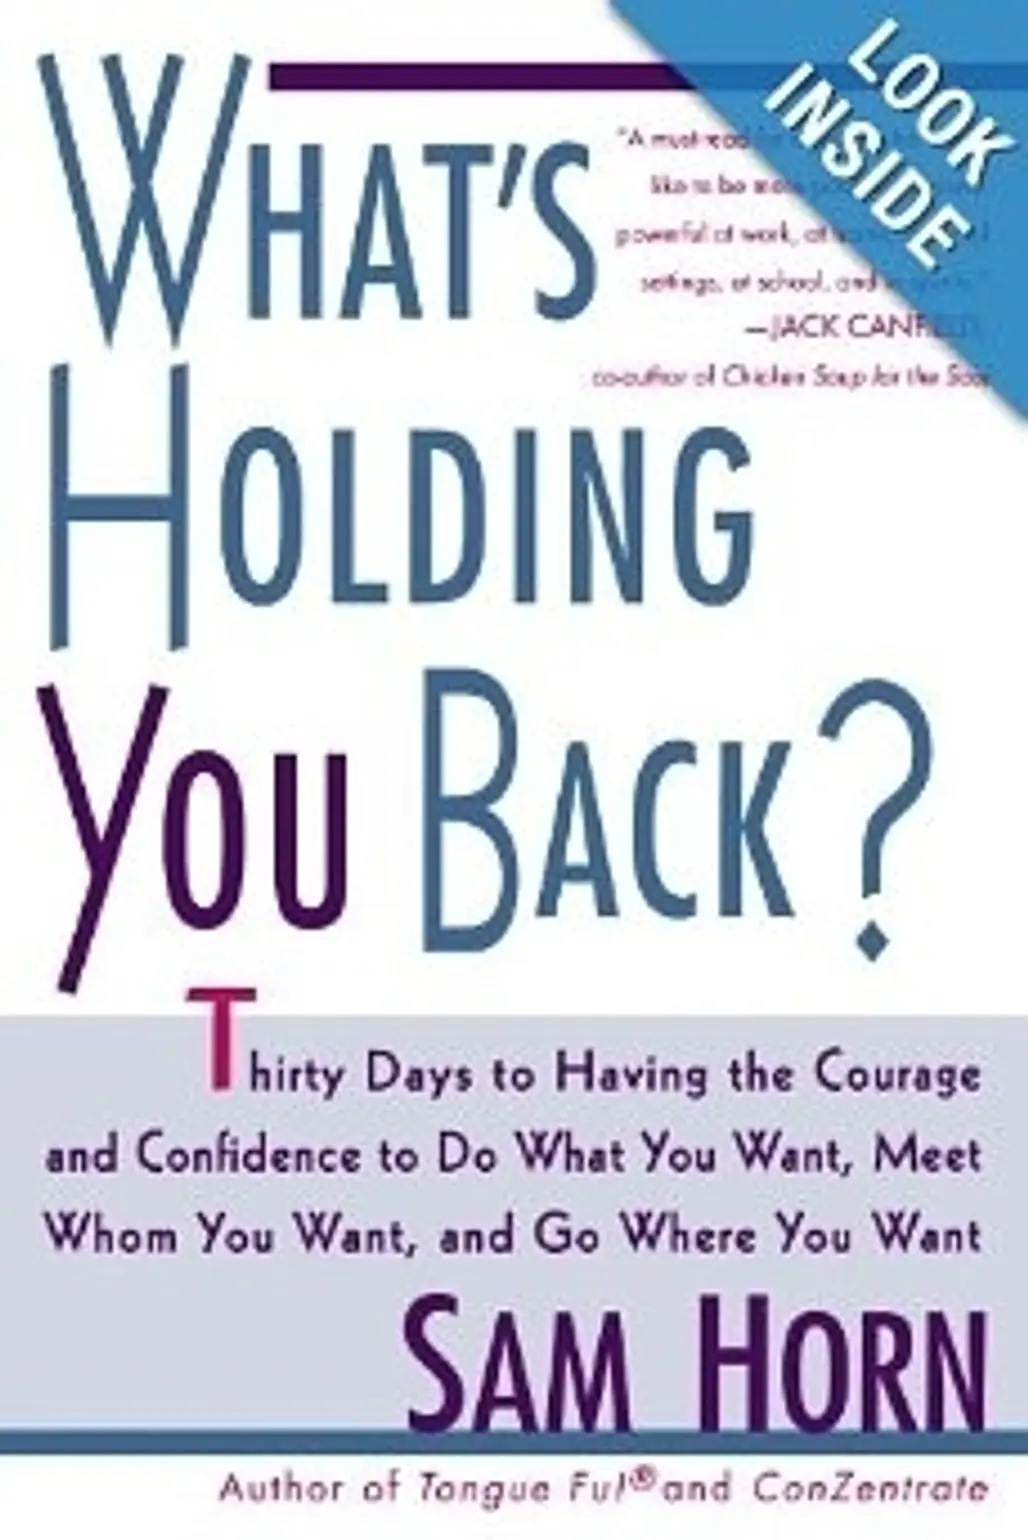 Sam Horn – What’s Holding You Back?